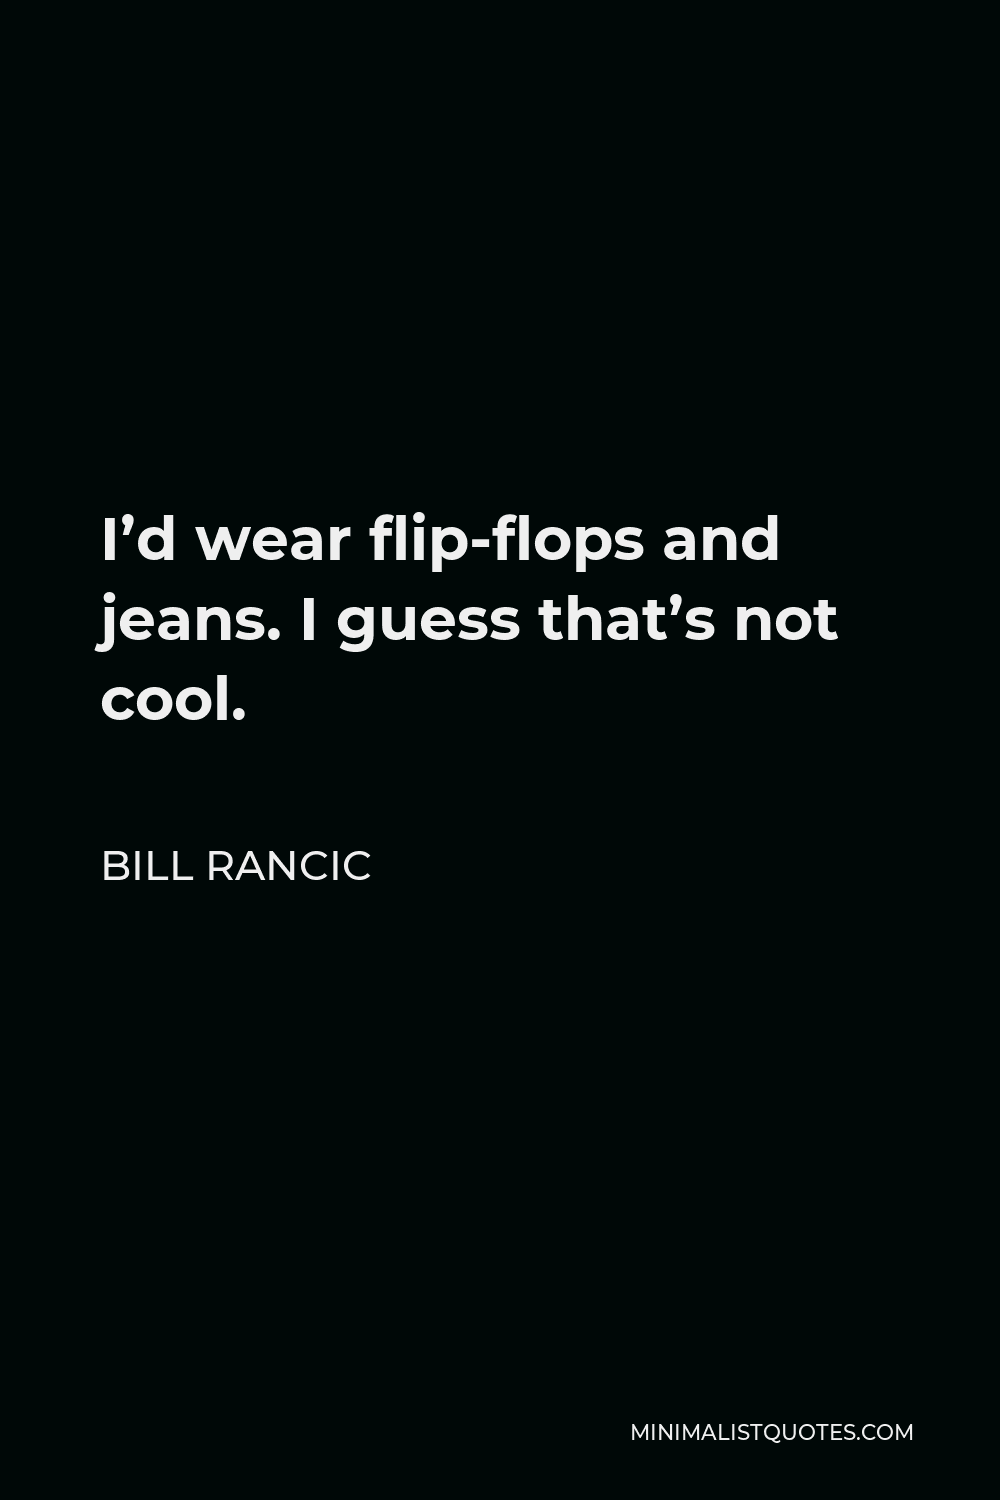 Bill Rancic Quote - I’d wear flip-flops and jeans. I guess that’s not cool.